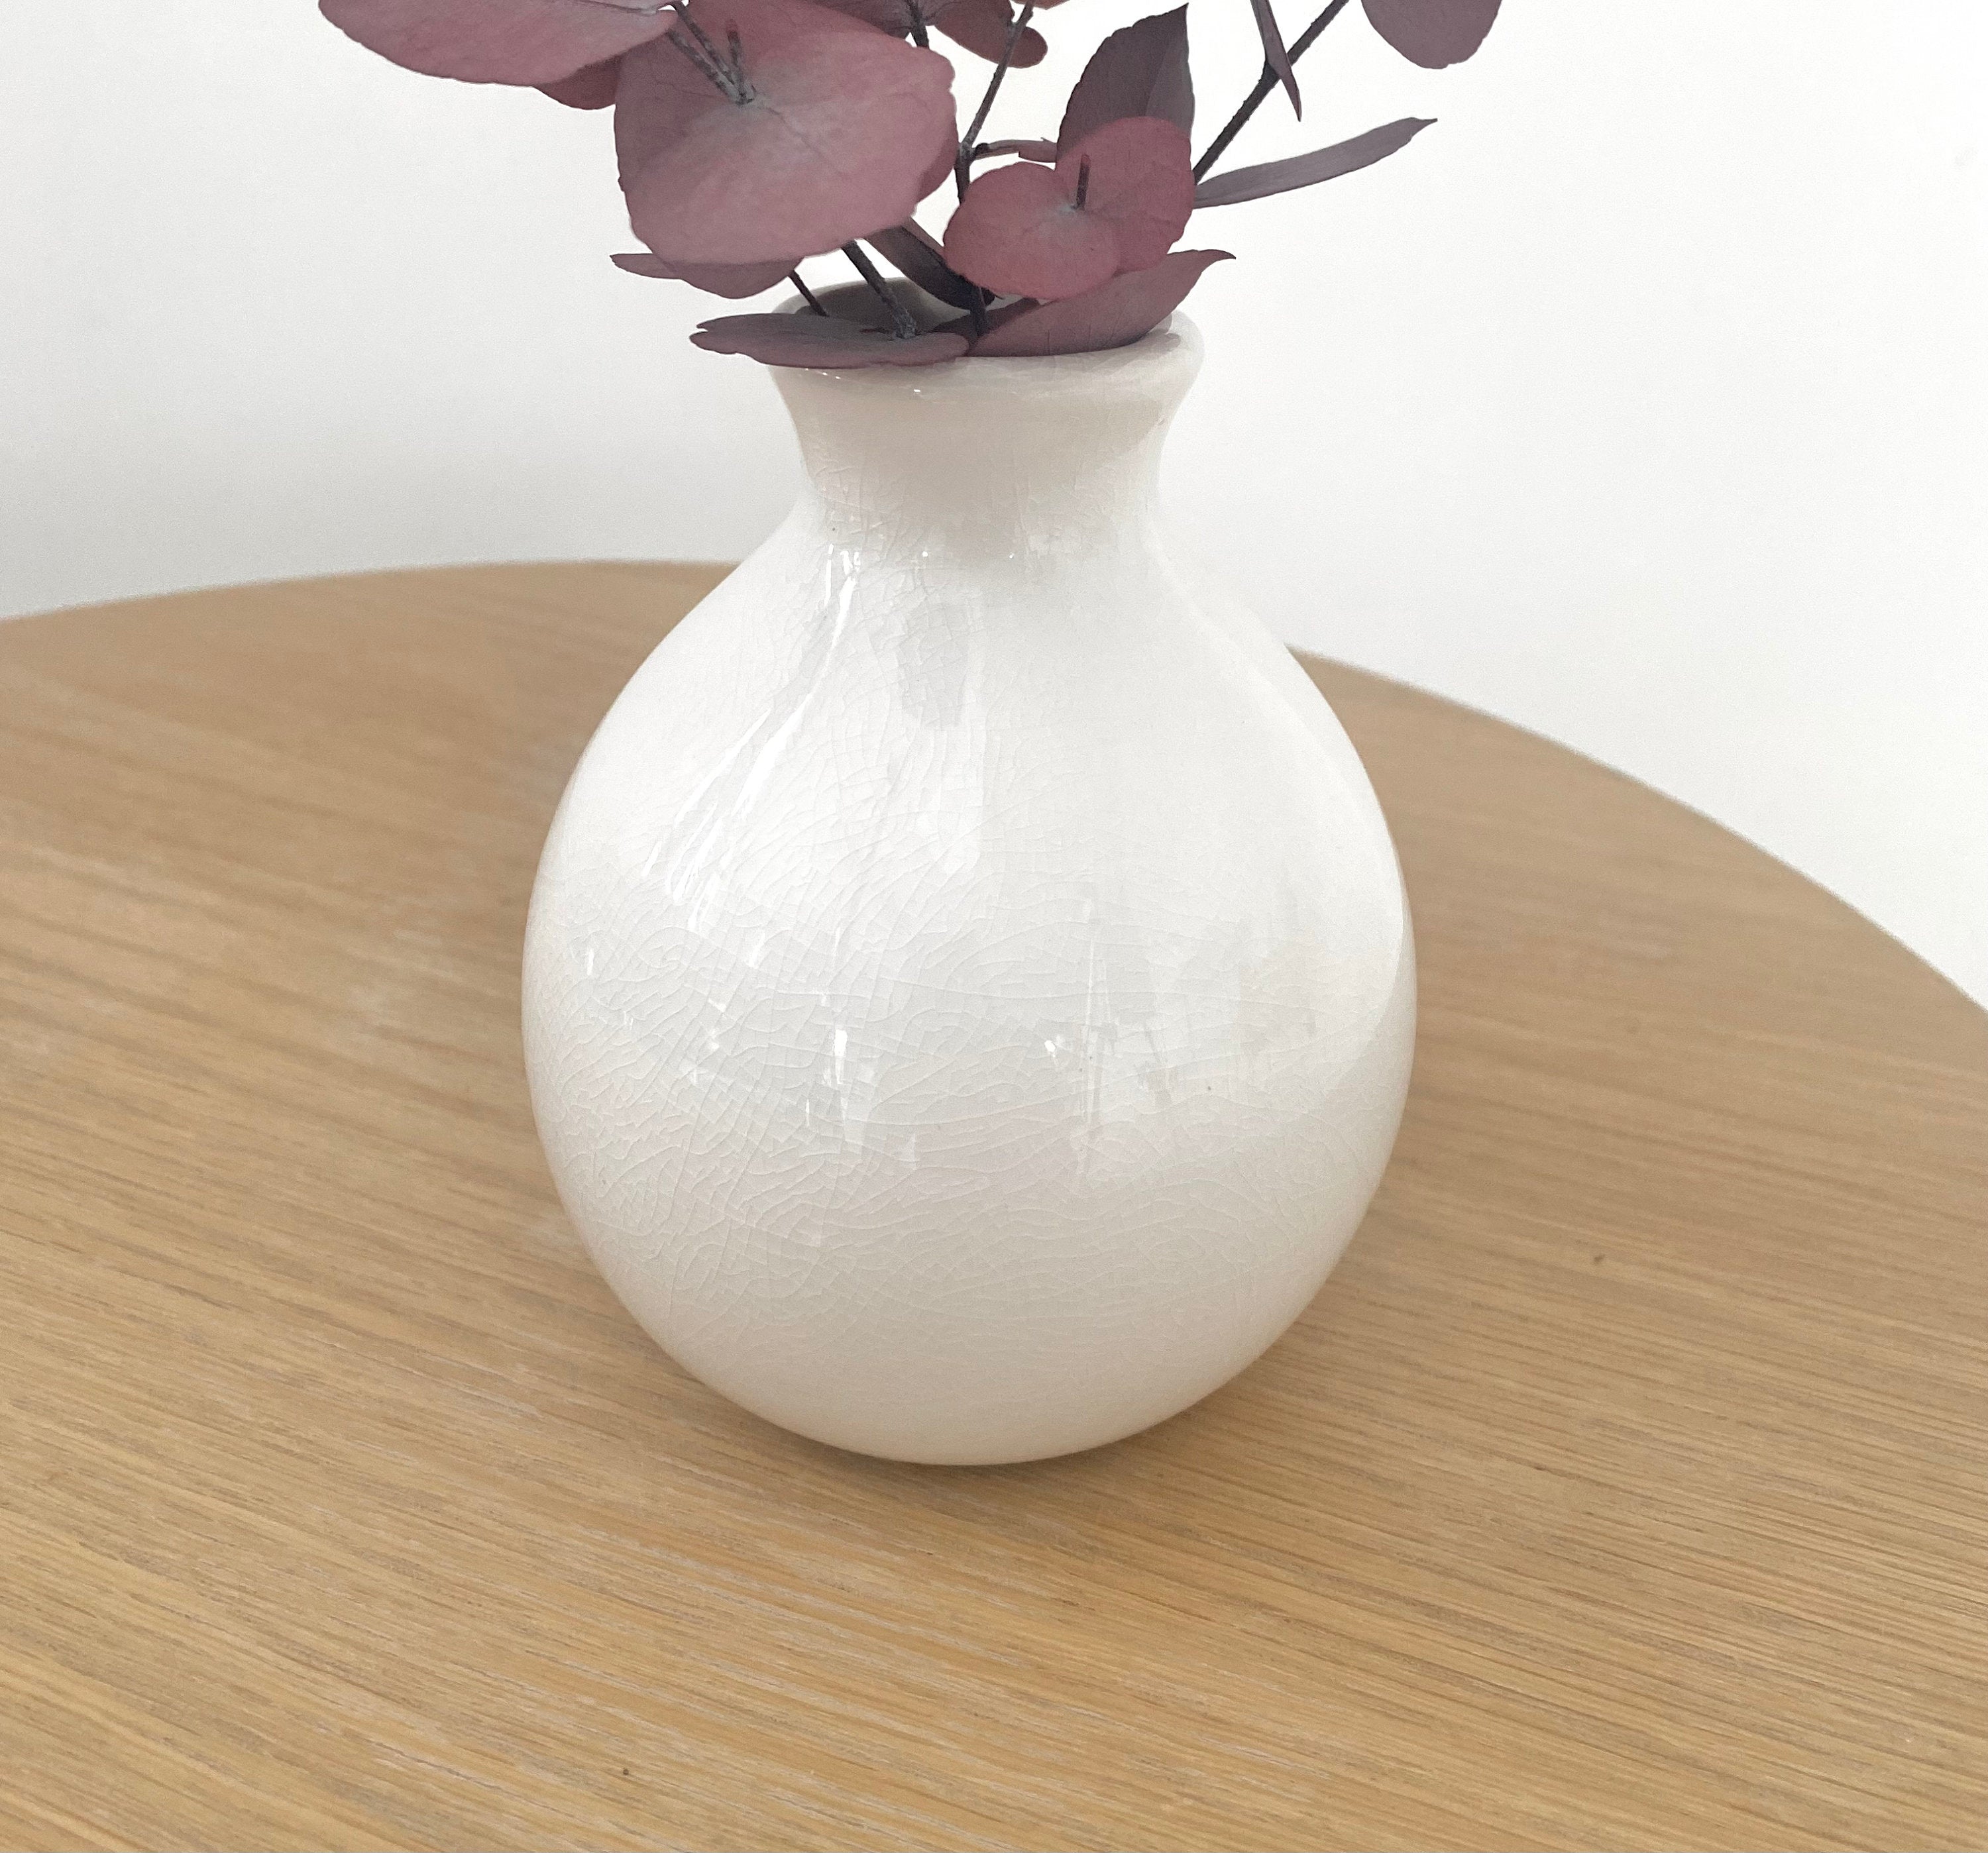 Crackle Glaze Minimalist White Bud Vases for Dried and Fresh Flowers